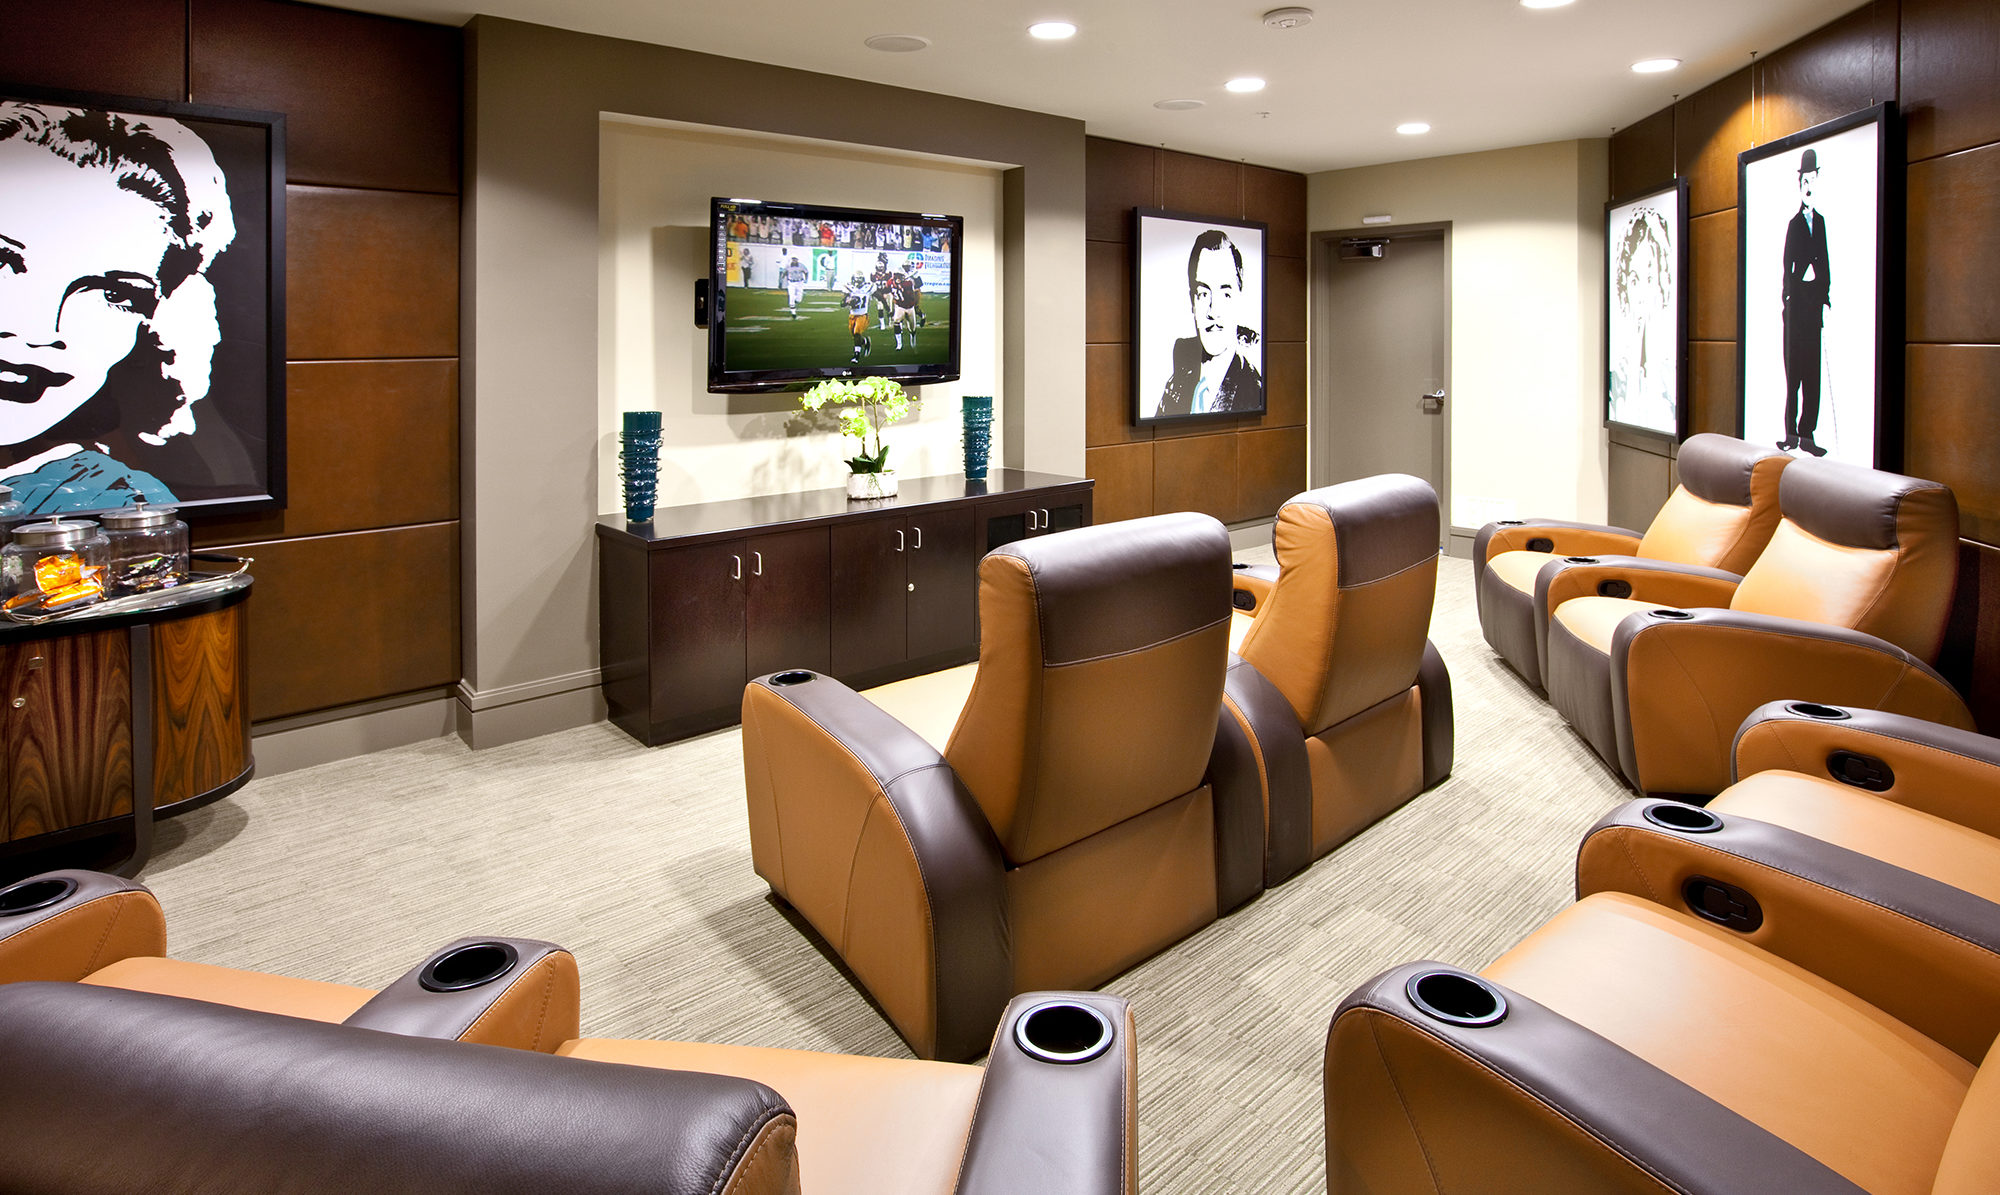 Theatre room with reclining leather chairs and television